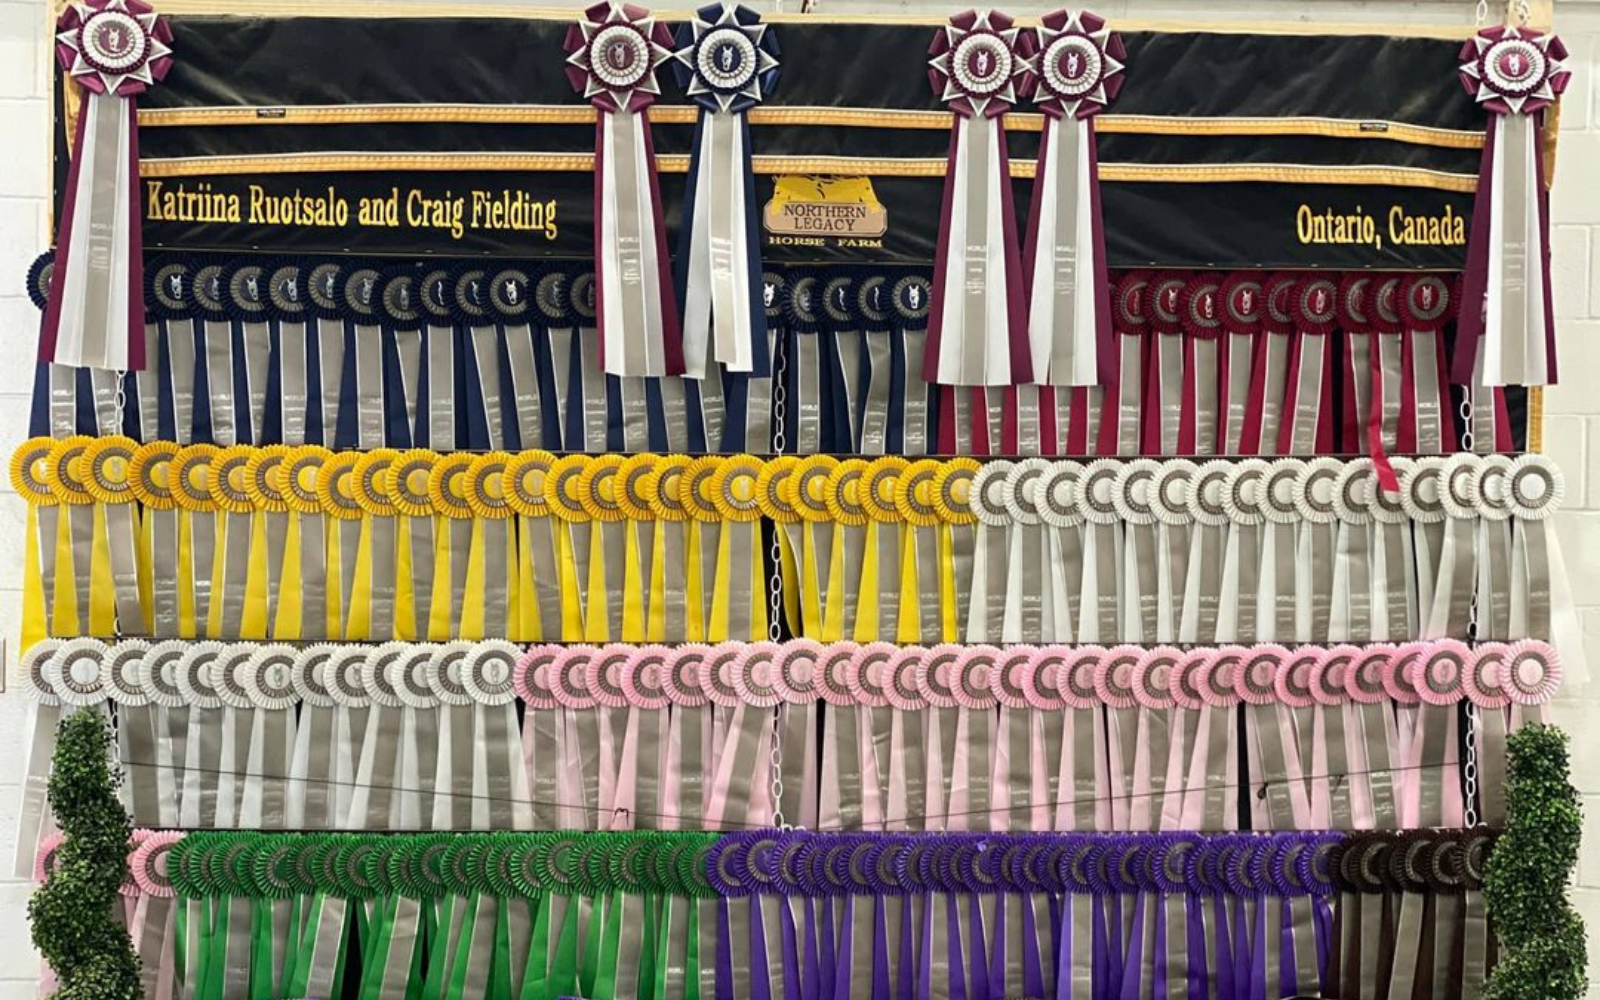 Northern Legacy Horse Farm's horse show ribbons from horseback riders.